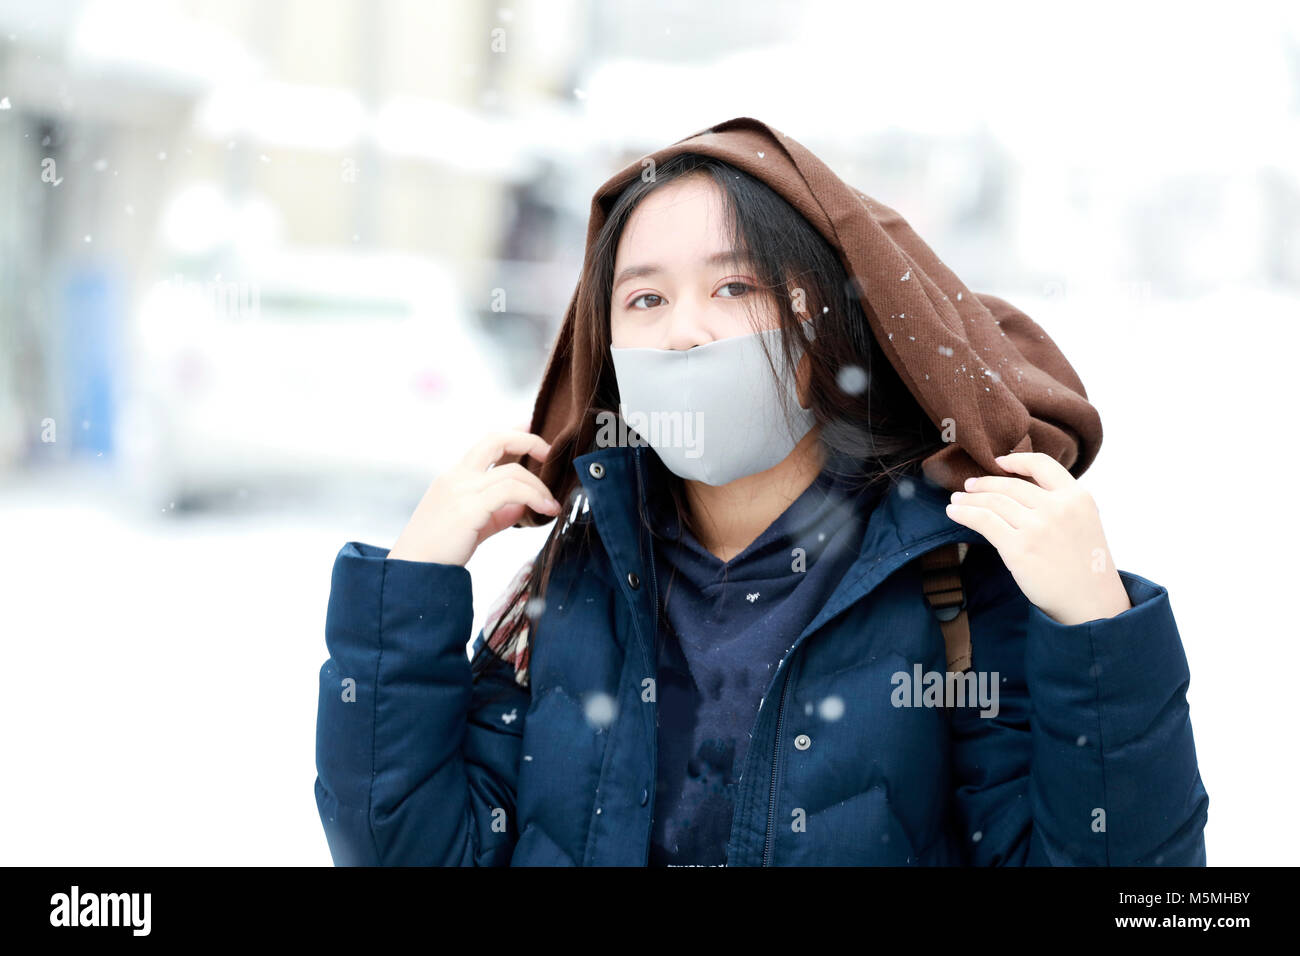 girl teenage on the snow day enjoying herself on a cold winter day in Japan Stock Photo